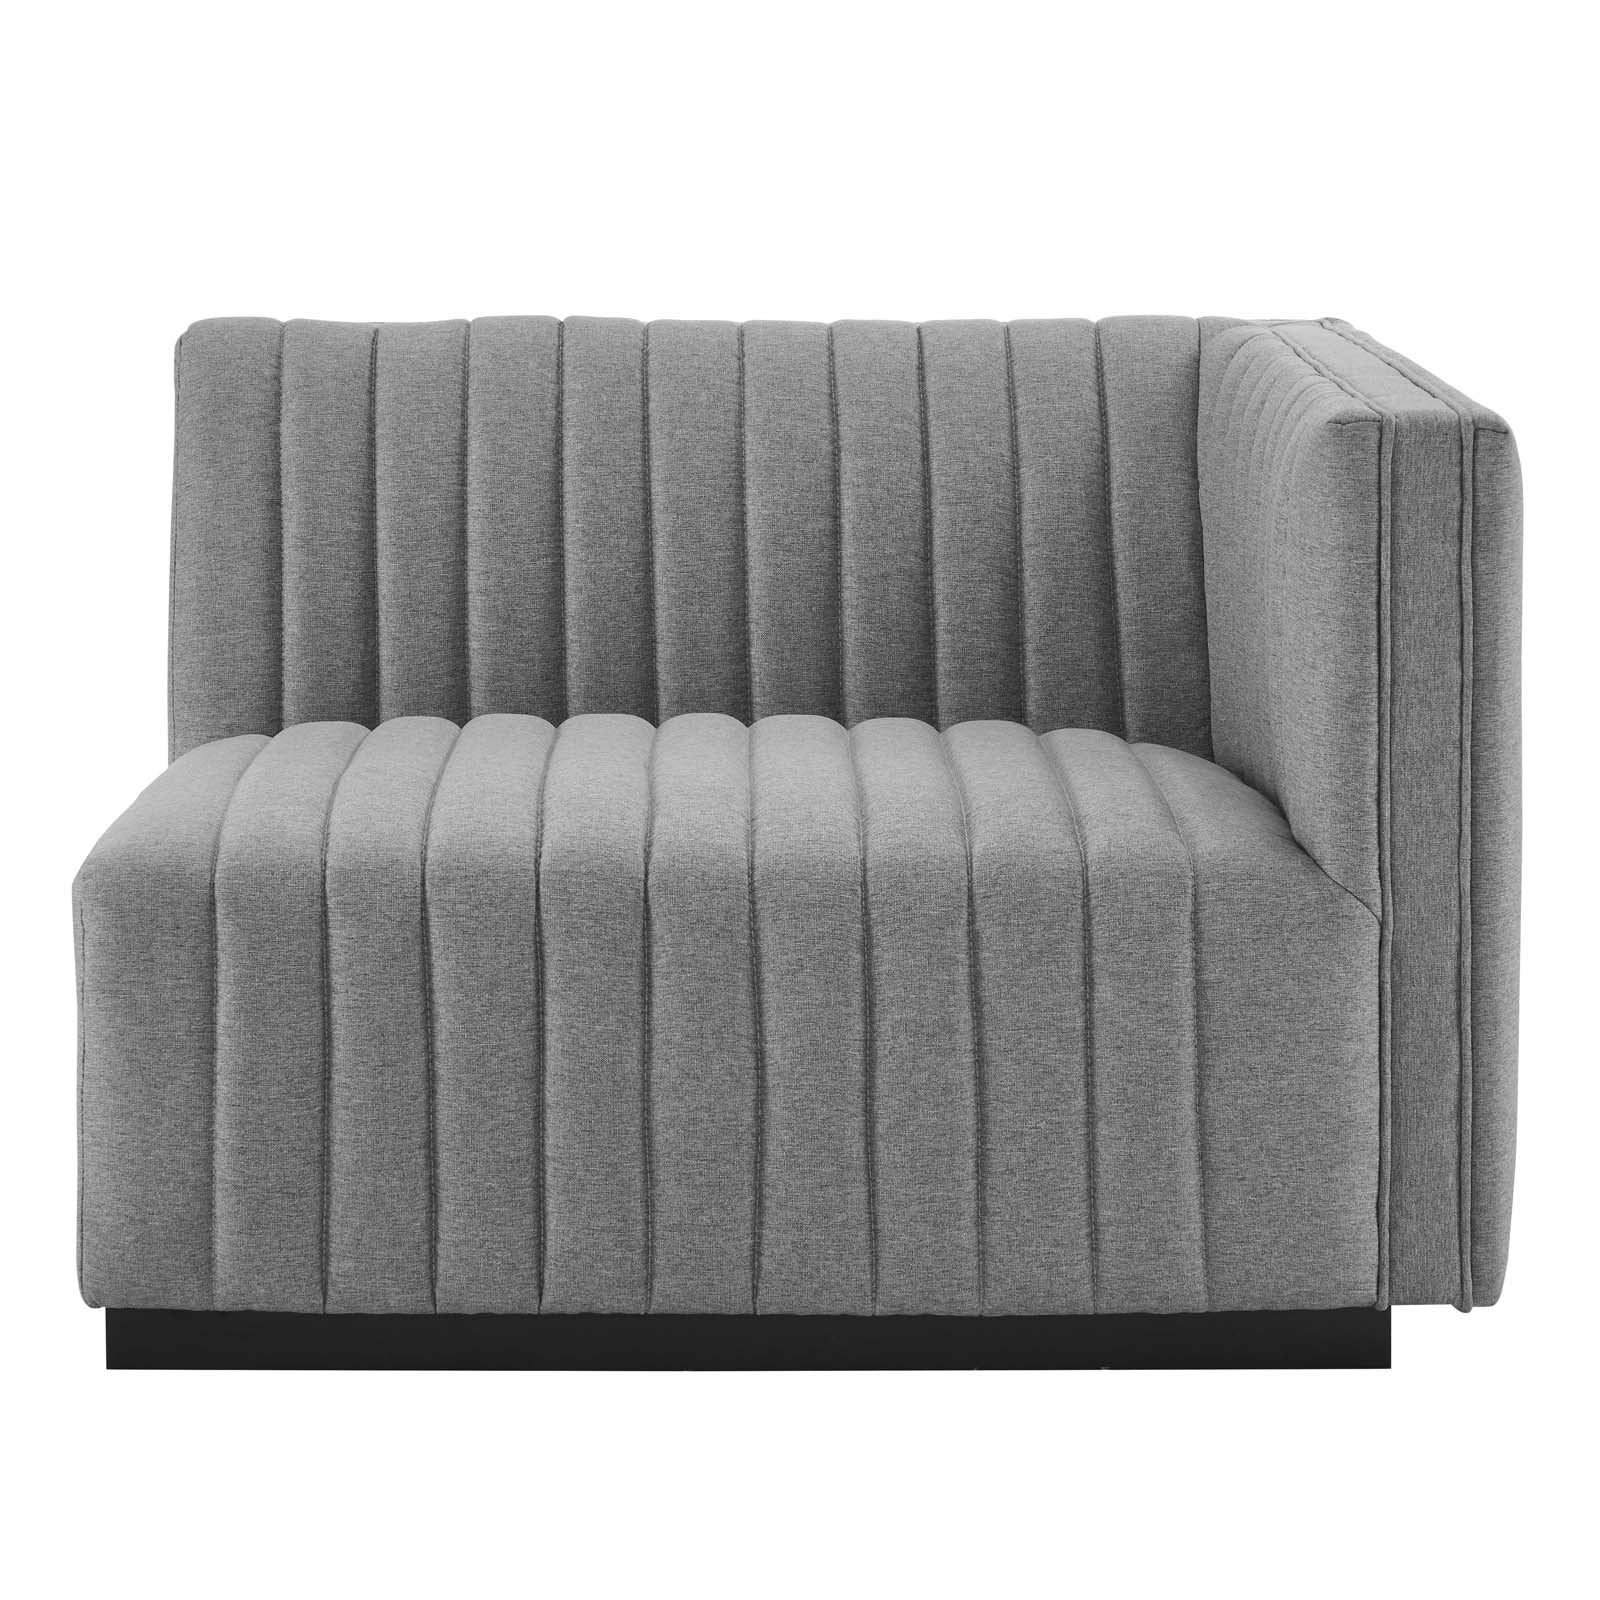 Modway Sectional Sofas - Conjure Channel Tufted Upholstered 114 " W Fabric 5-Piece L-Shaped Sectional Black Light Gray